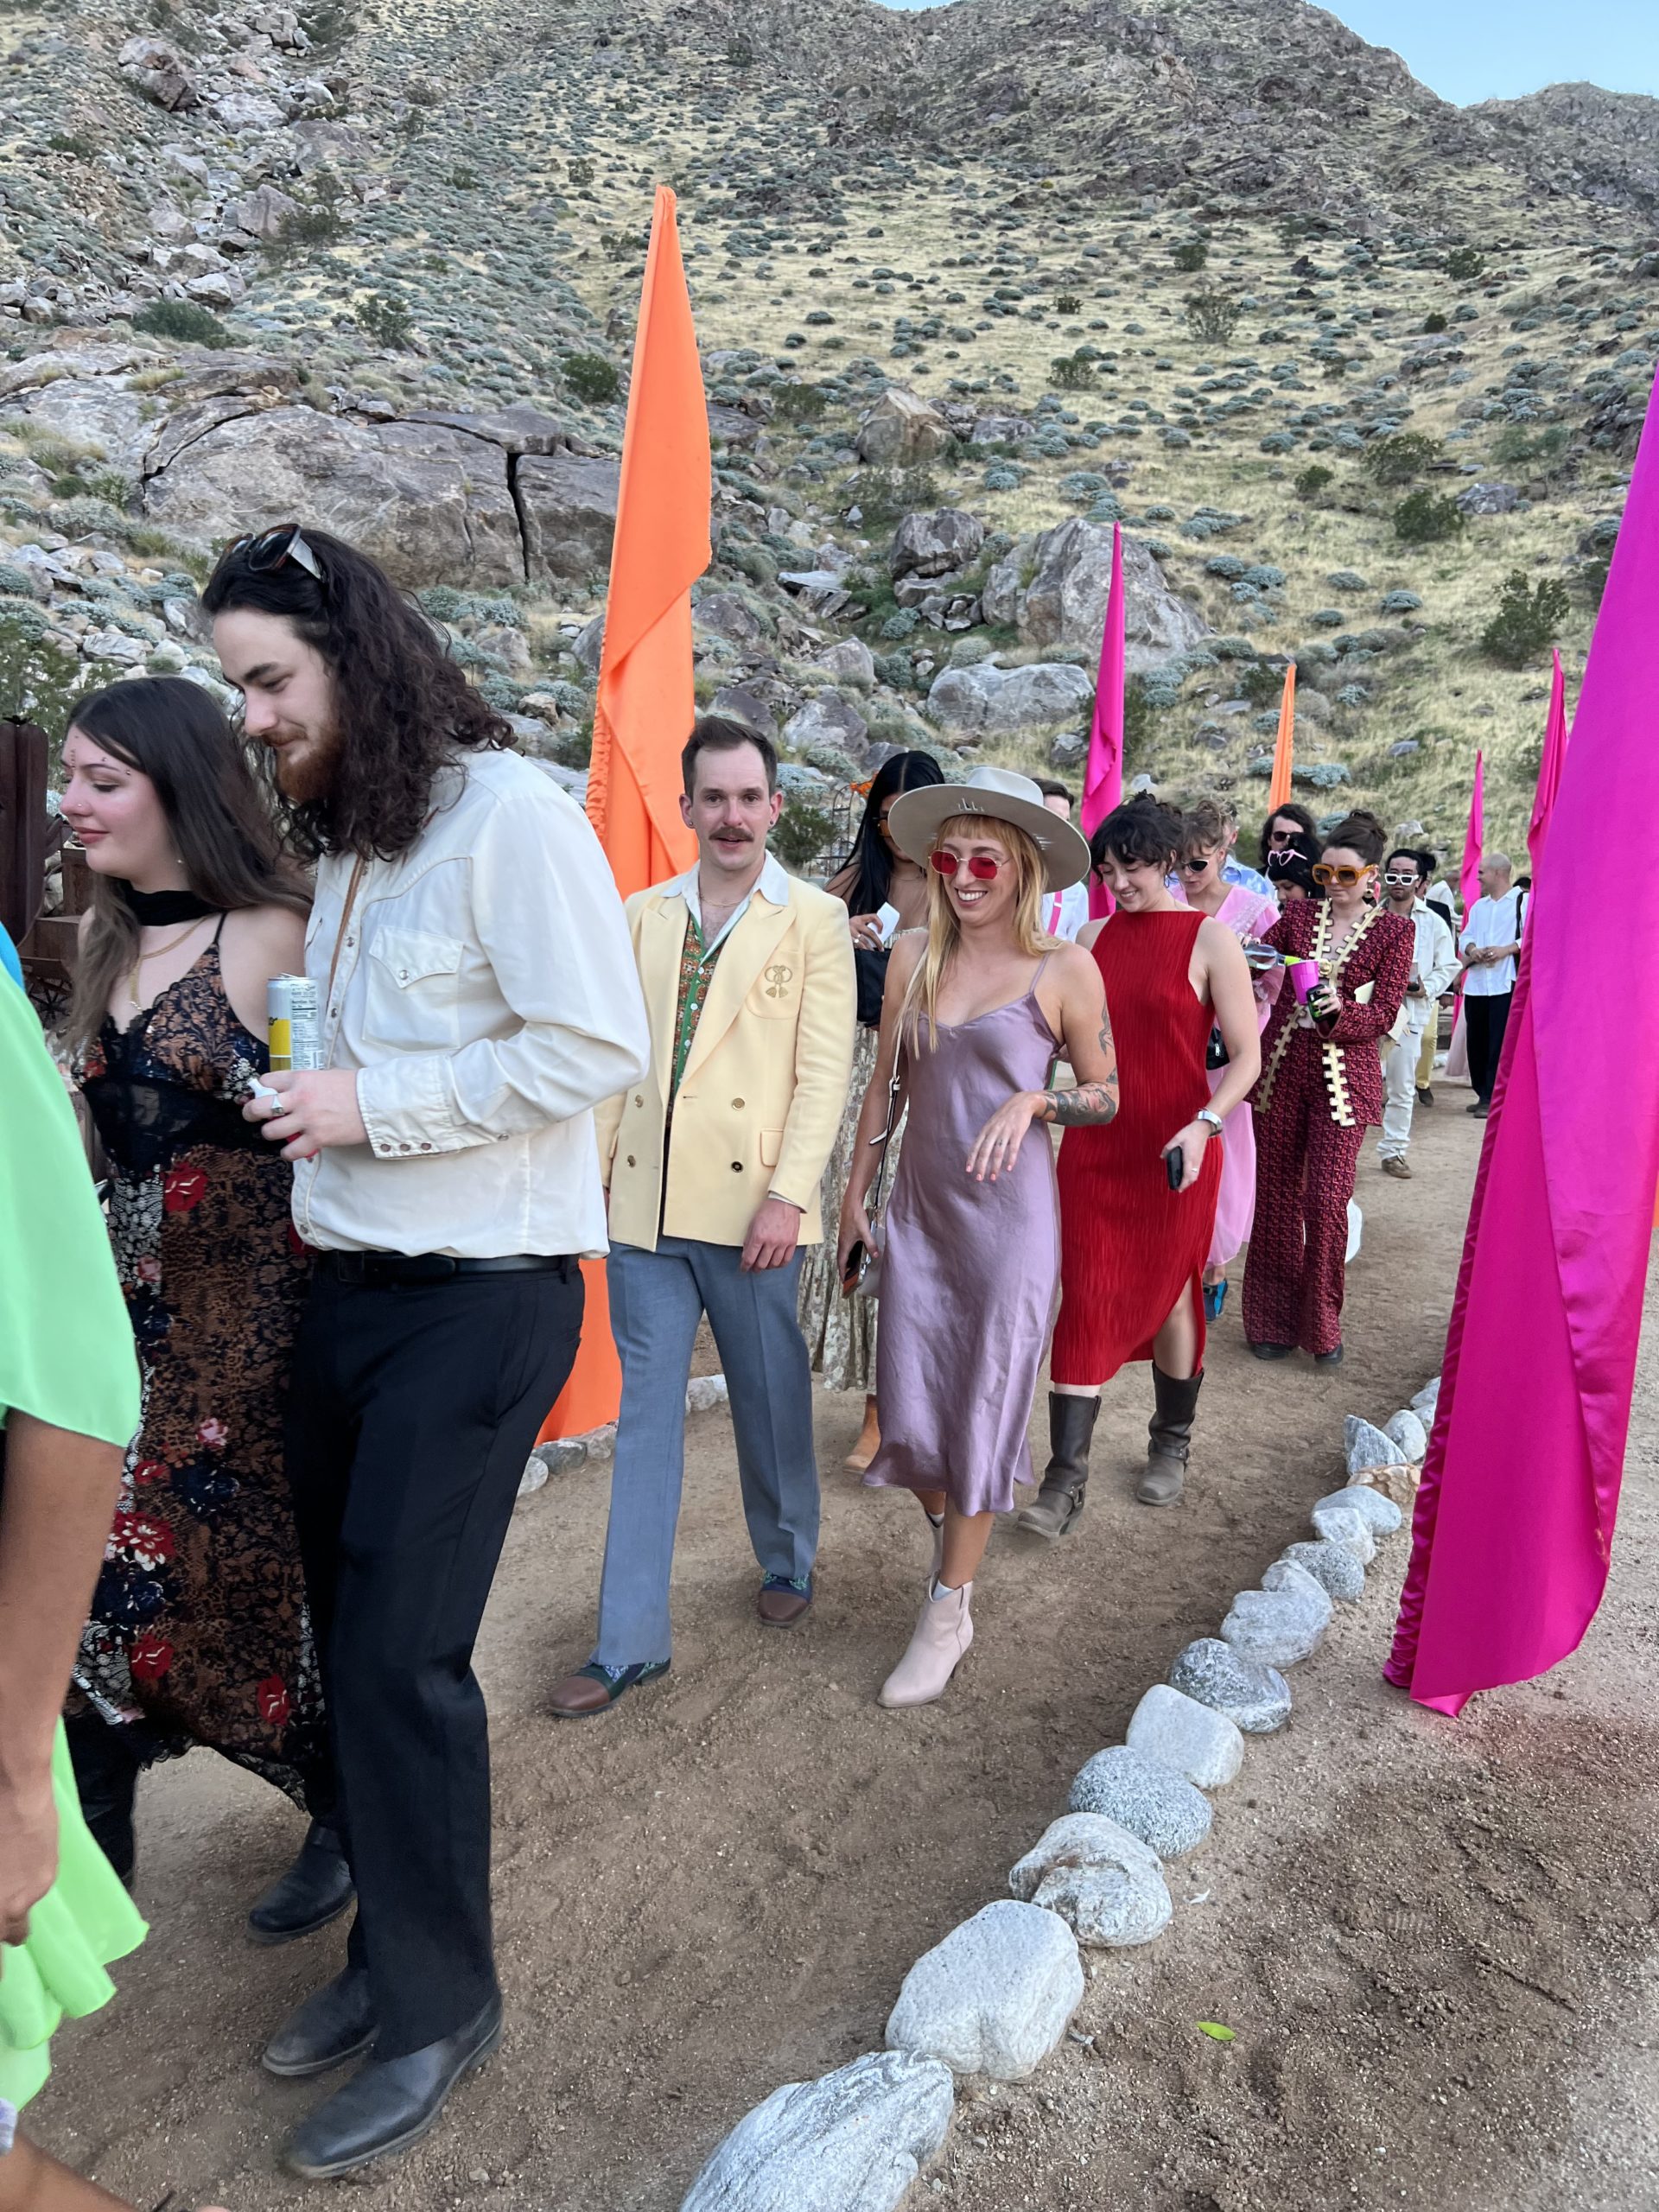 It's Not A Rave, It's A Desert Wedding: Embracing the Unconventional